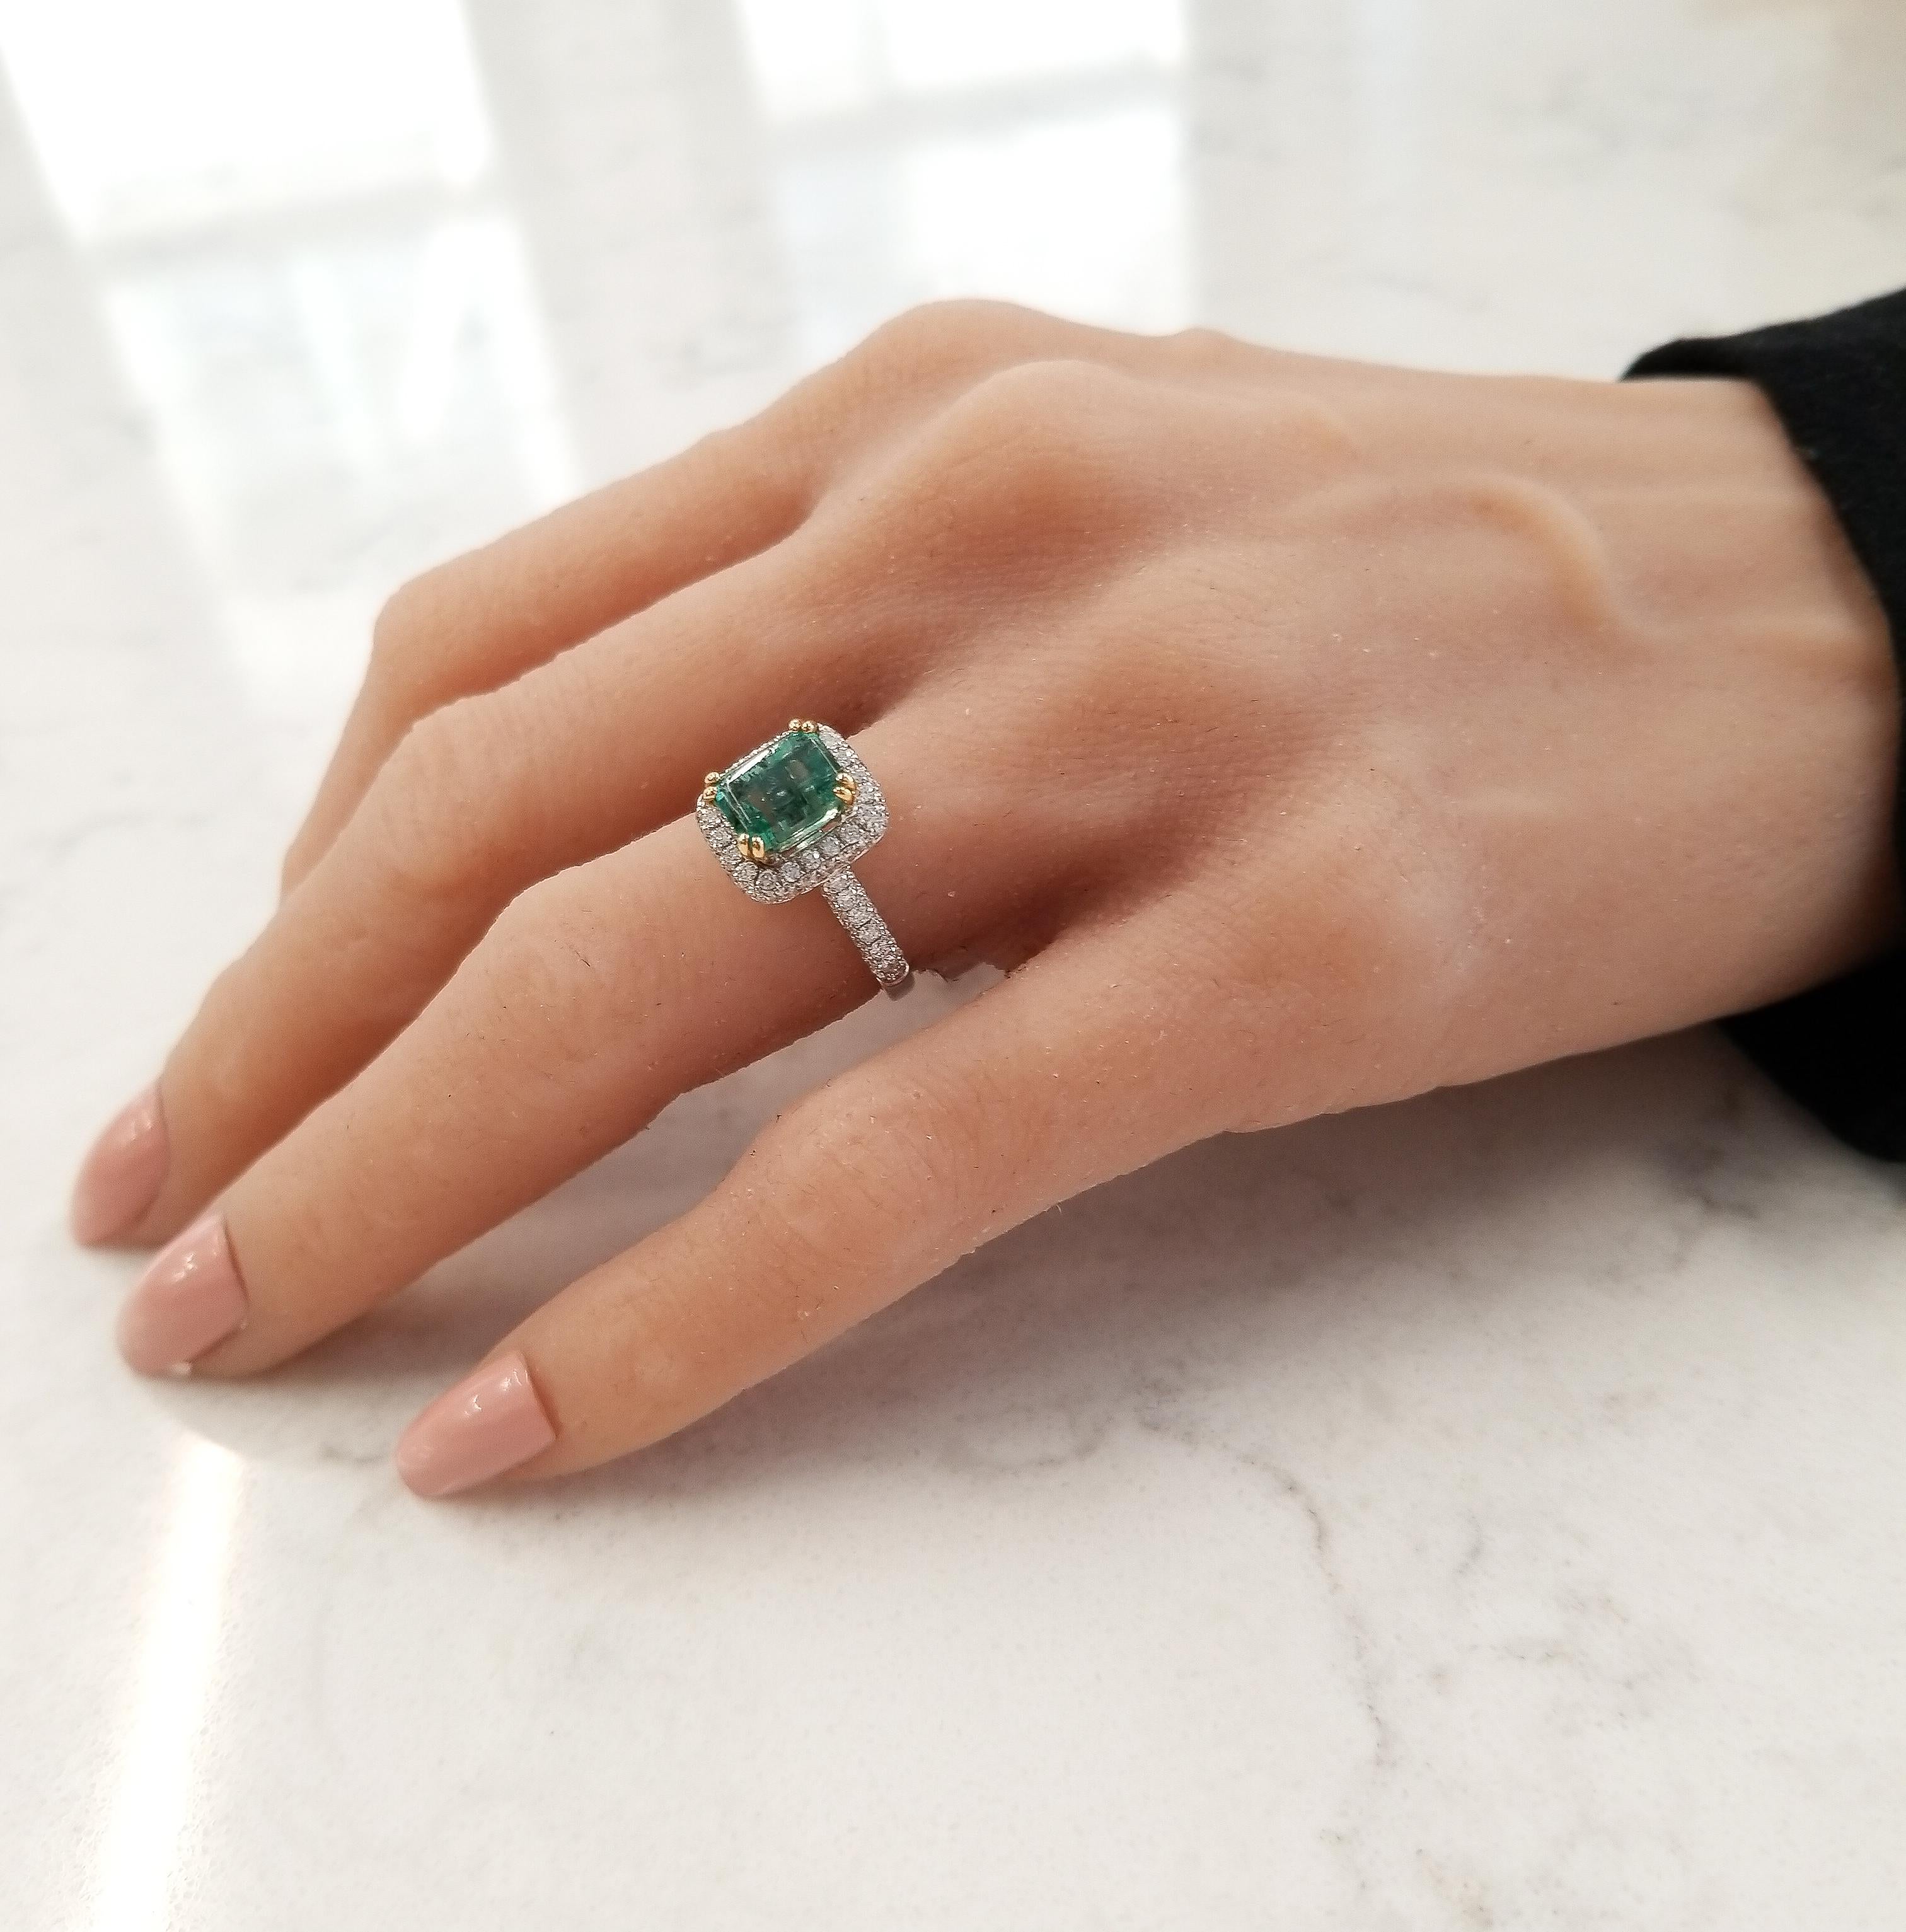 This is a 1.95 carat vibrant grass-green emerald that is skillfully set in the center of this incredible ring measuring 8x6MM. This gem origin is Brazil, its transparency and color are unparalleled to others. This gem is set in a rich yellow gold